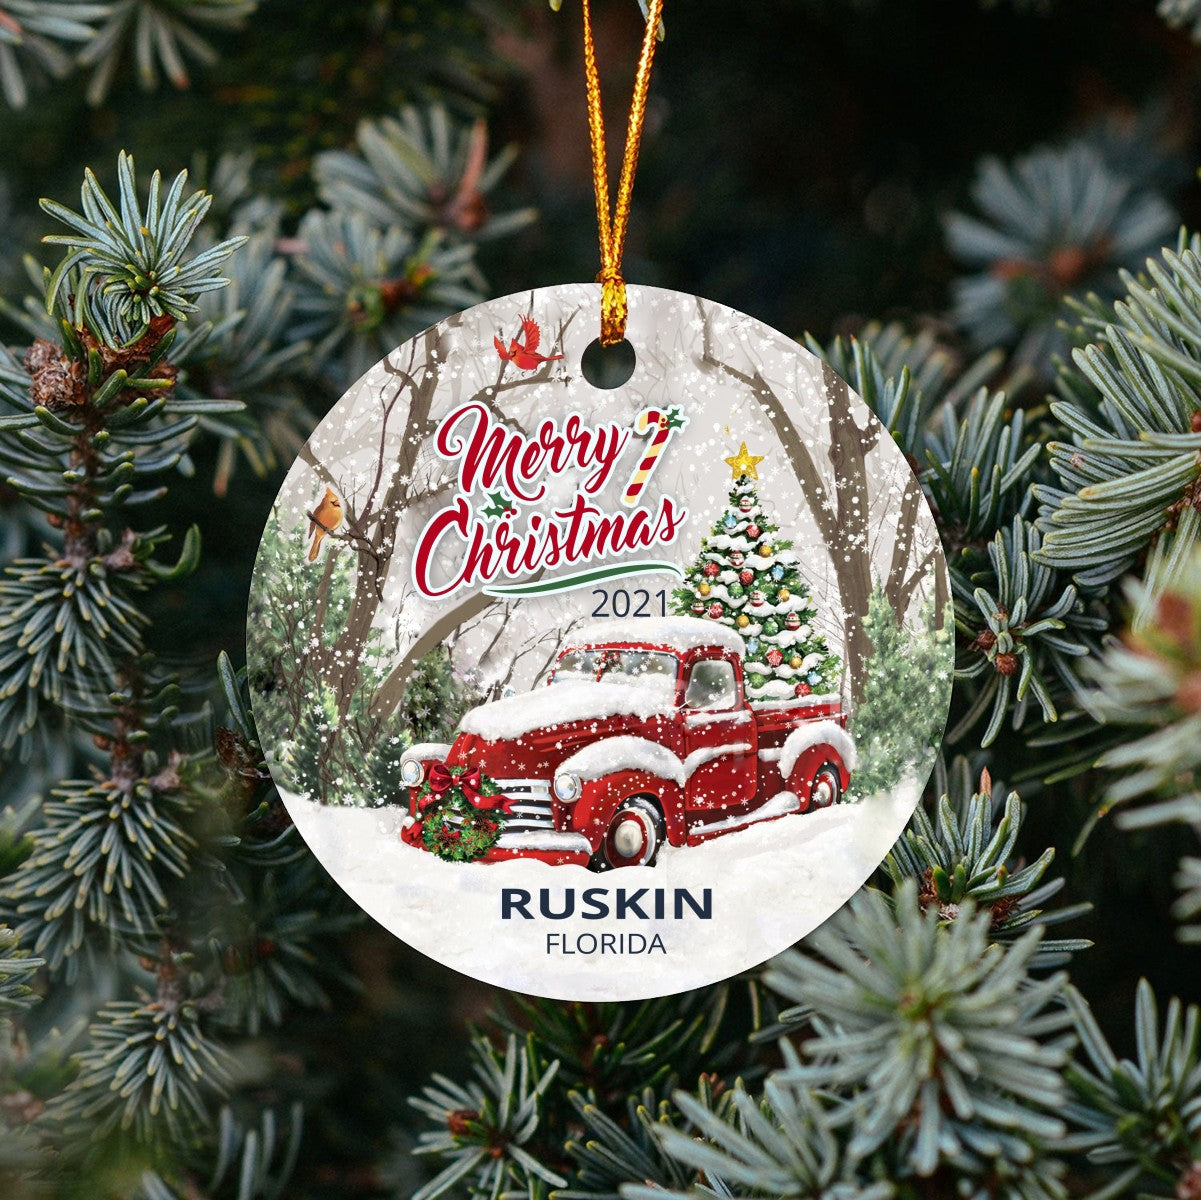 Christmas Tree Ornaments Ruskin - Ornament With Name City, State Ruskin Florida FL Ornament - Red Truck Xmas Ornaments 3'' Plastic Gift For Family, Friend And Housewarming